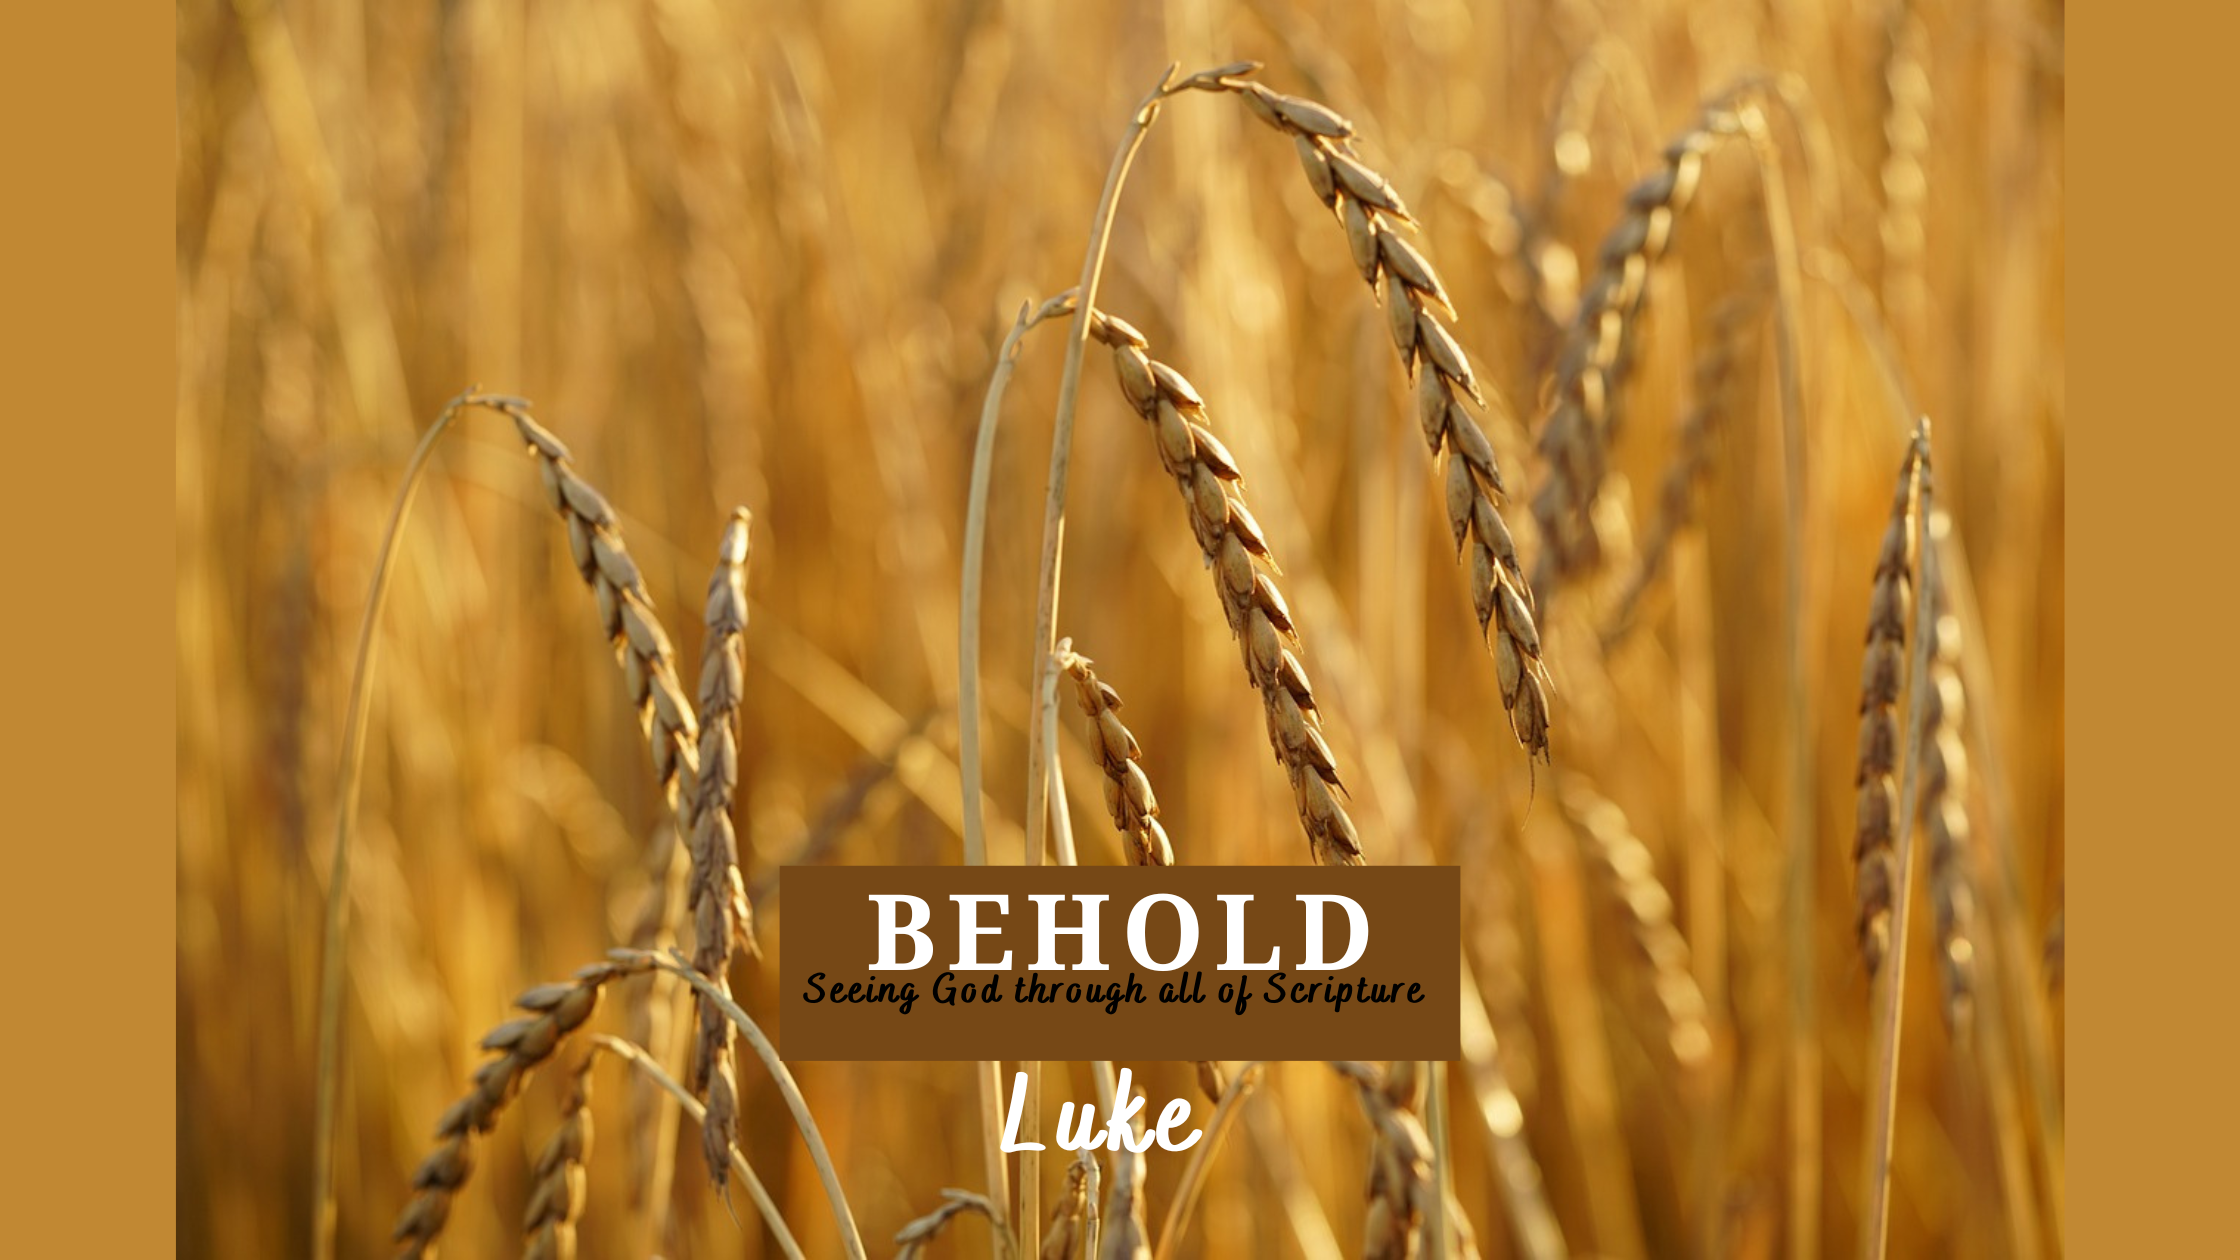 The Lord of the Harvest: A Call to Prayer and Labor